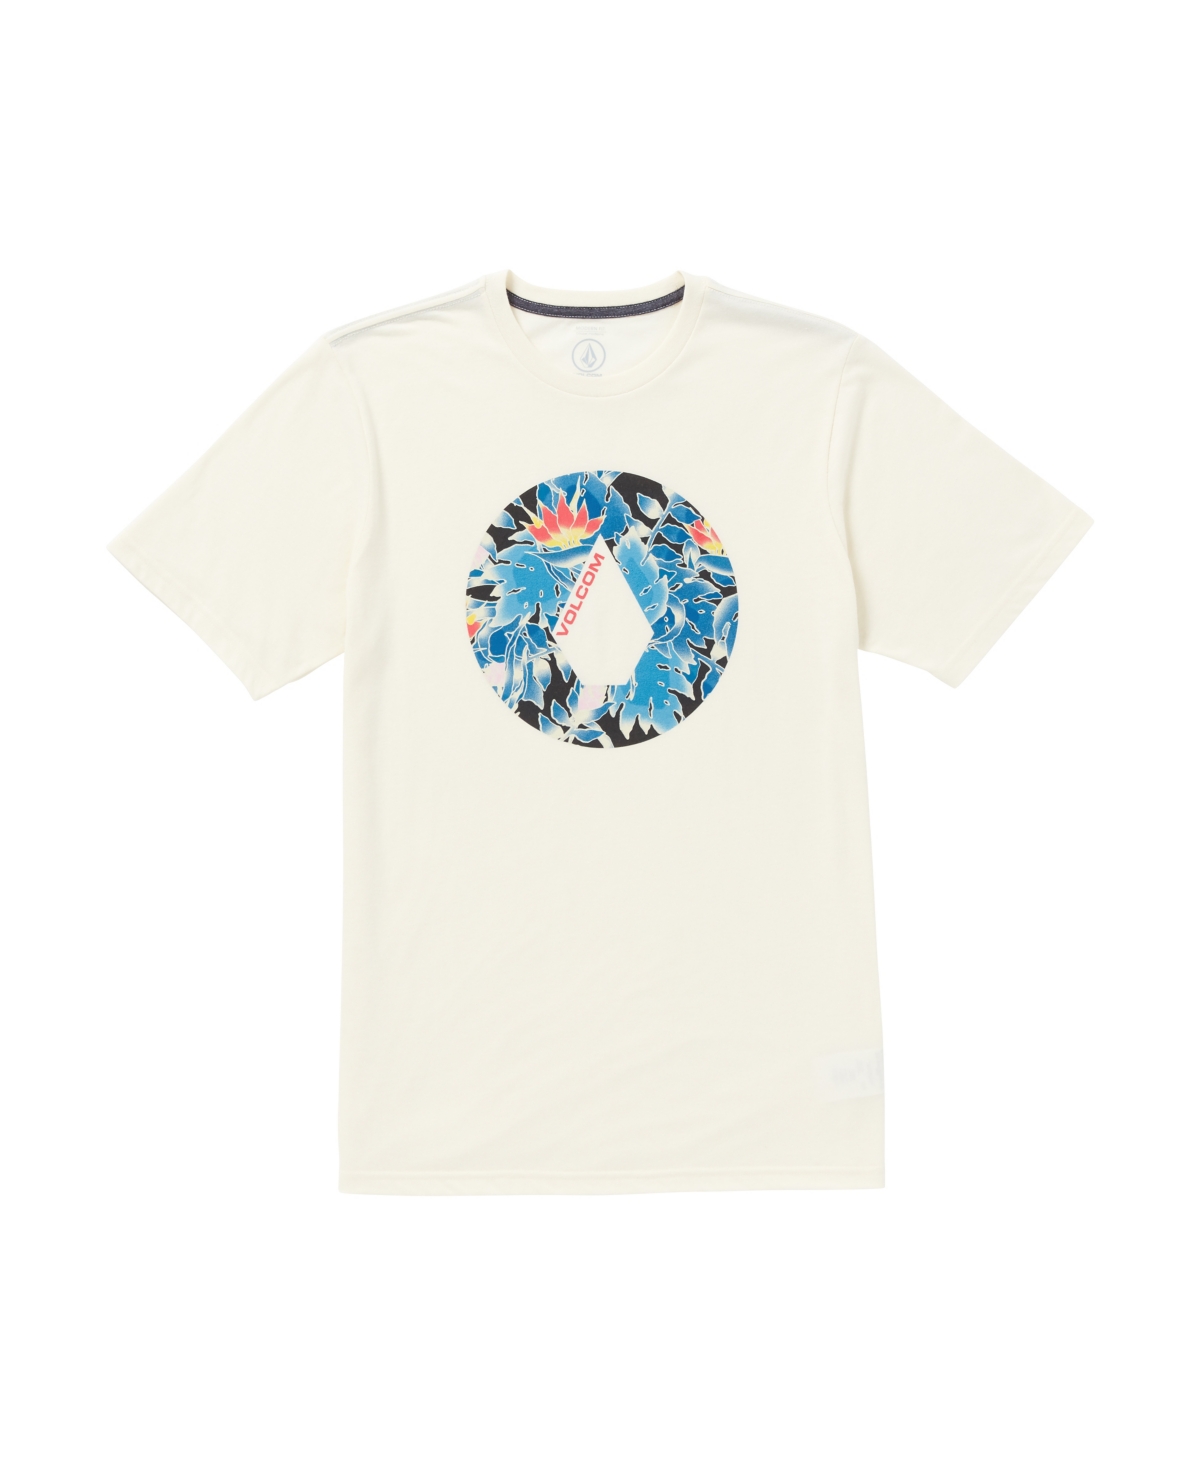 Men's Fill It Up Short Sleeve T-shirt - Off White Heather